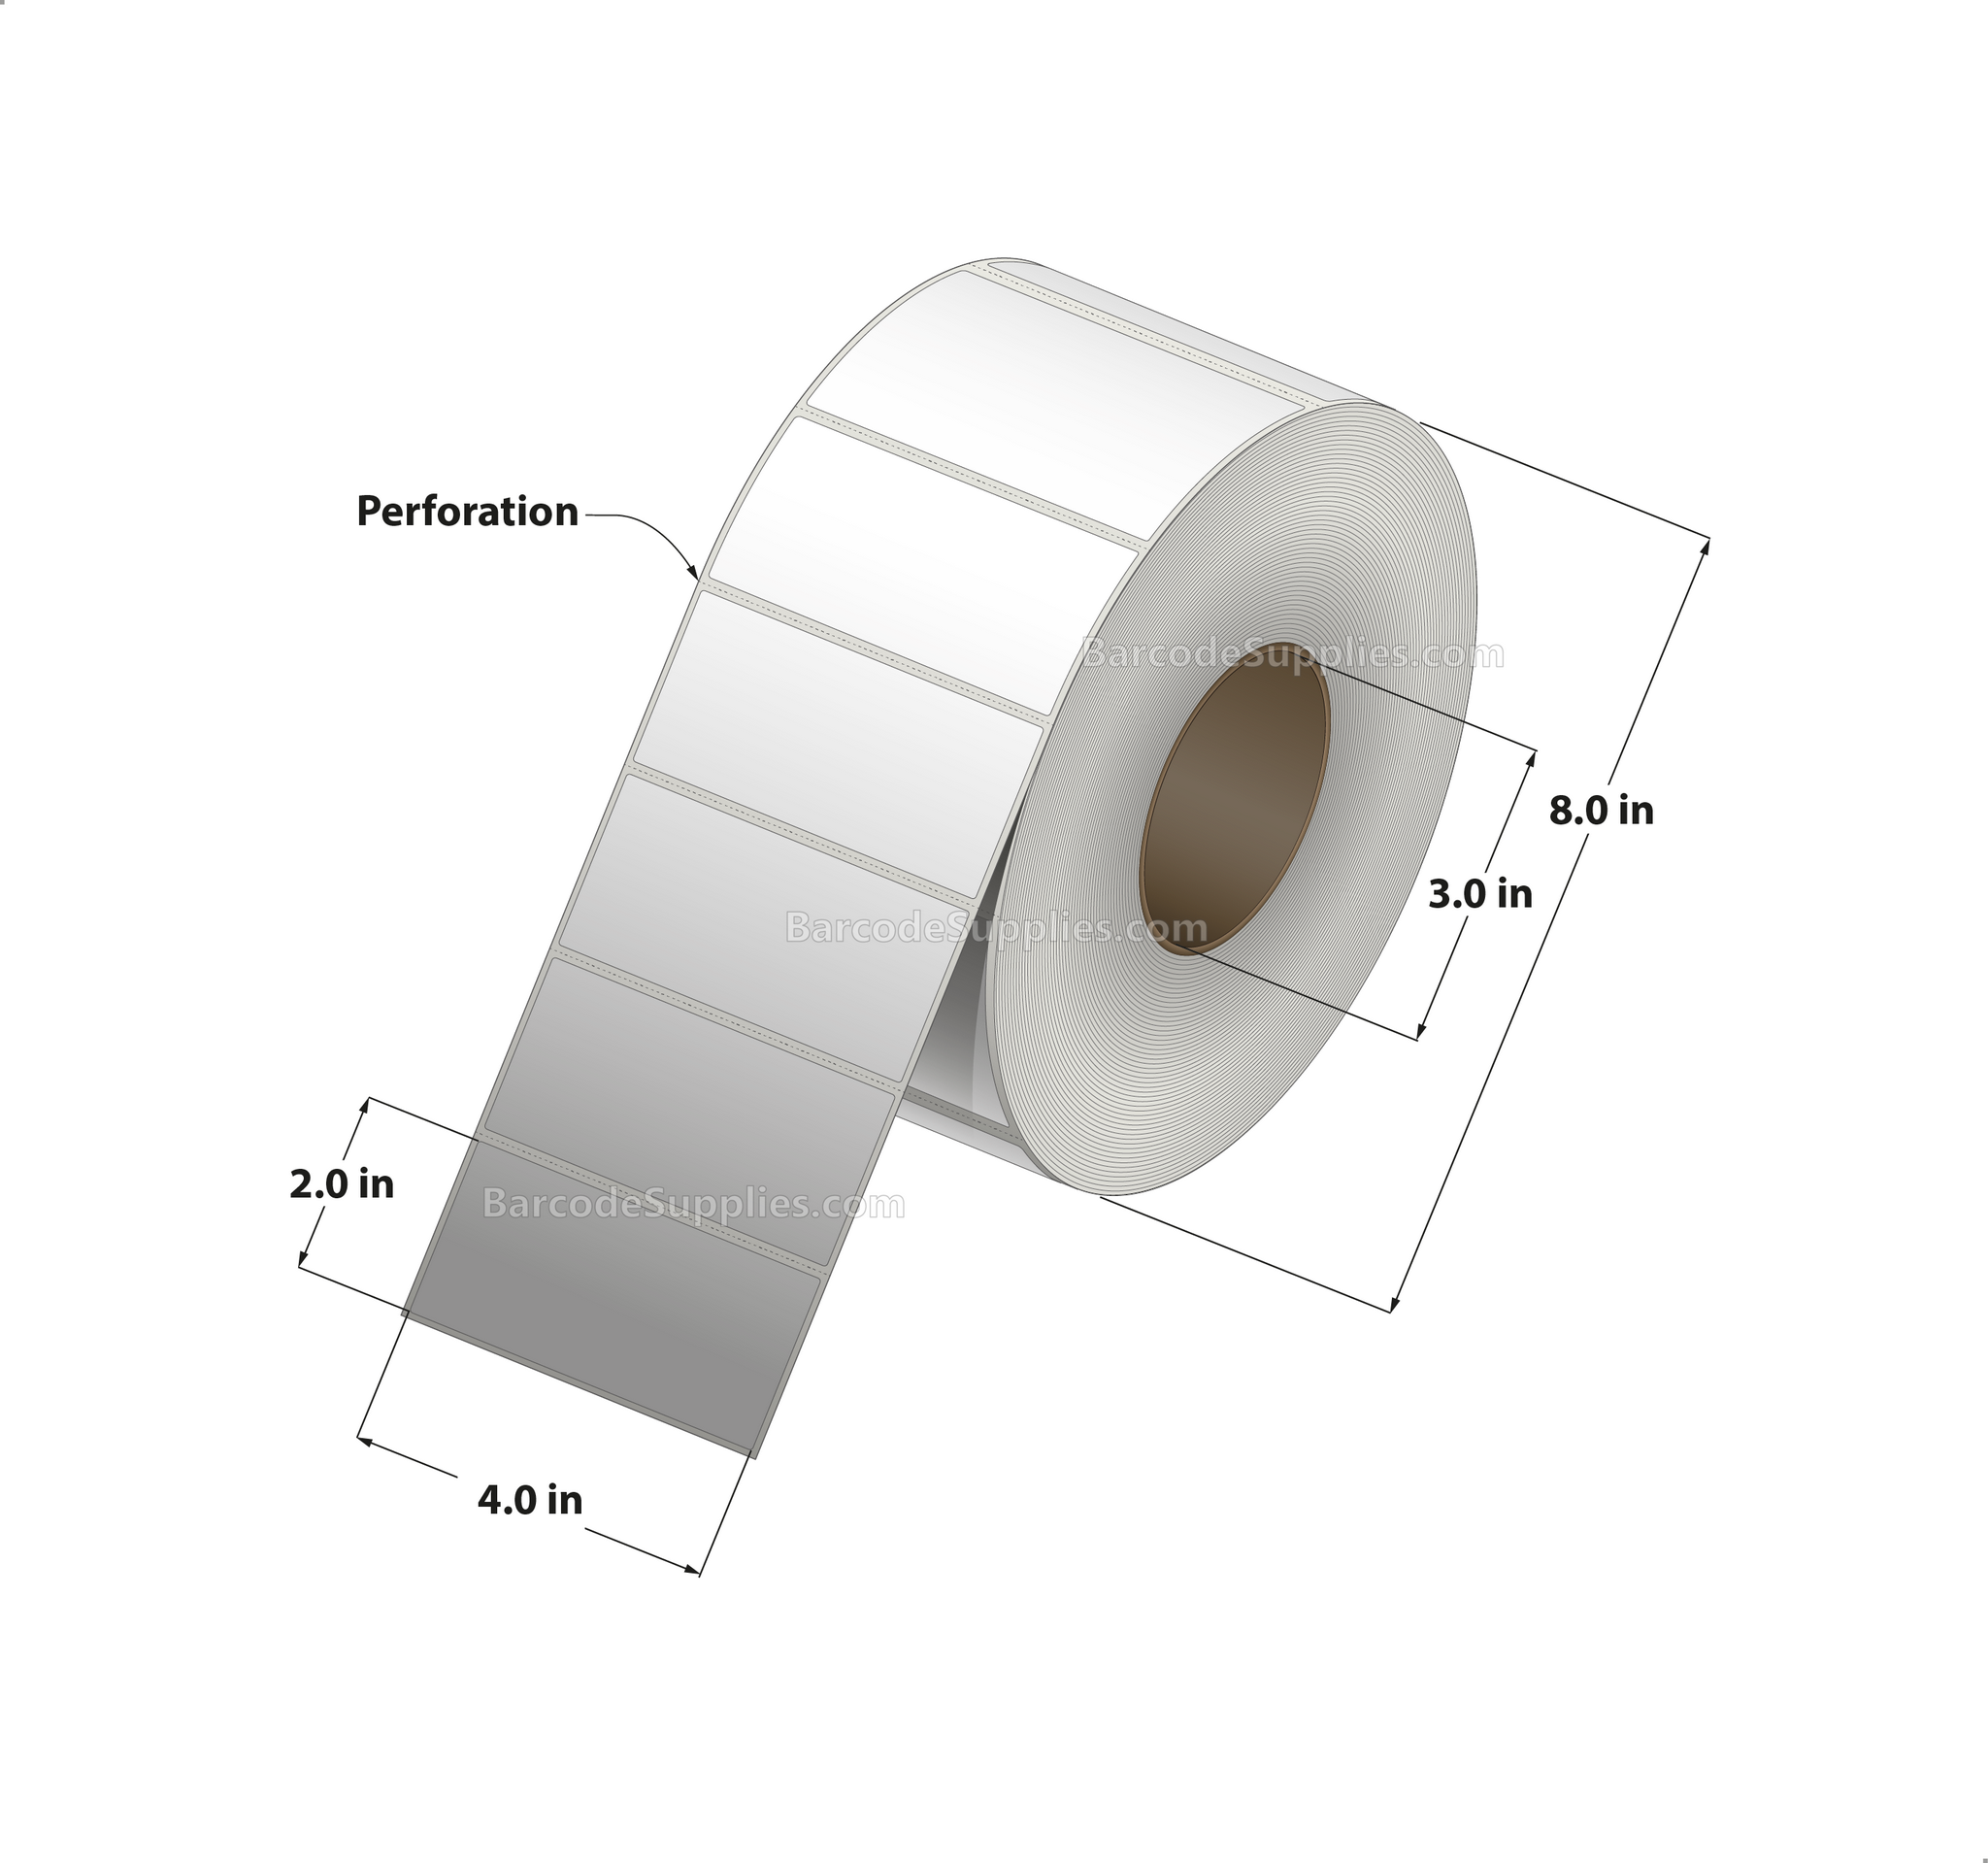 4 x 2 Thermal Transfer White Labels With Permanent Adhesive - Perforated - 2730 Labels Per Roll - Carton Of 4 Rolls - 10920 Labels Total - MPN: RK-4-2-2730-3